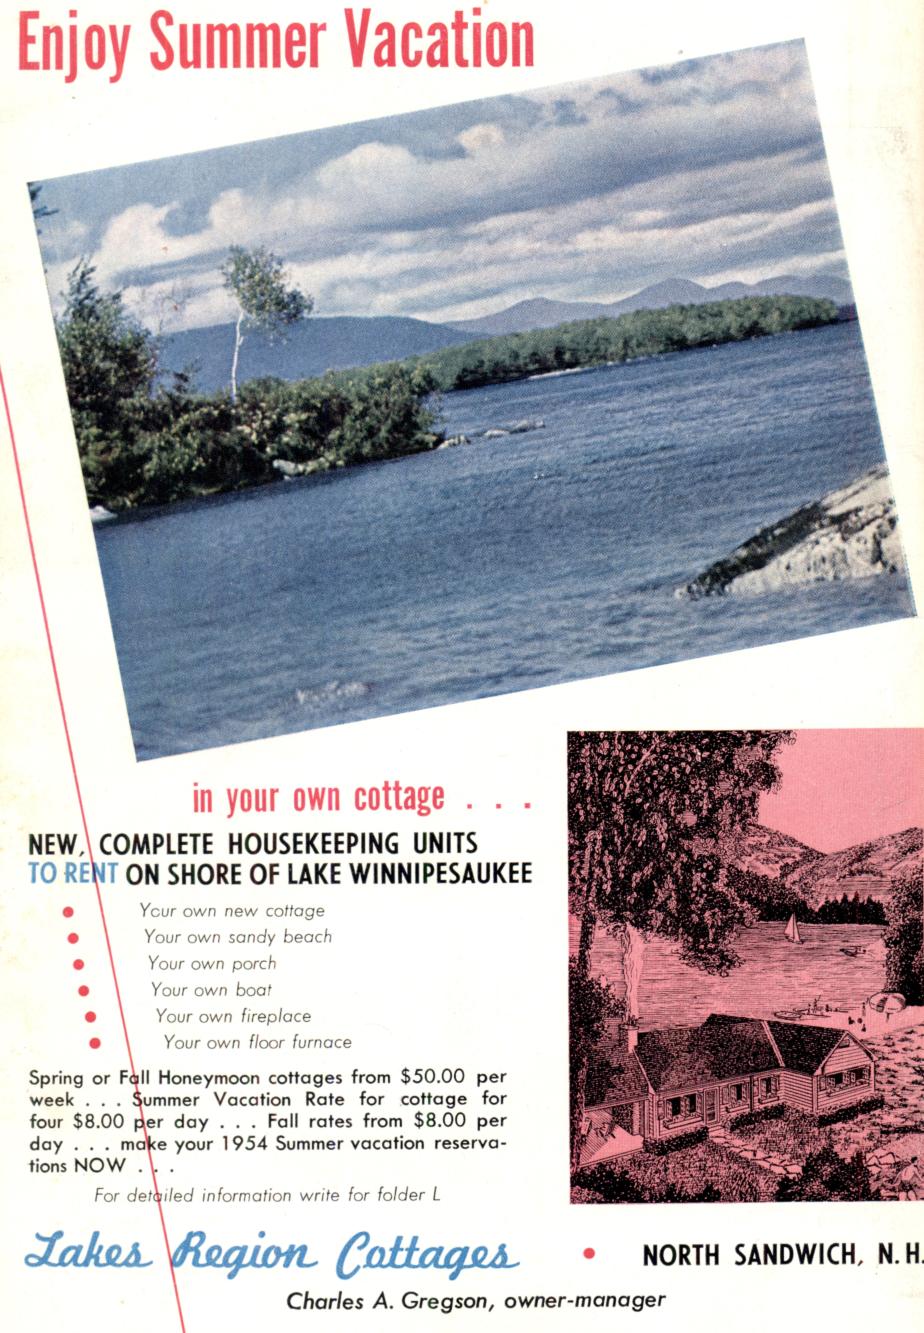 Lakes Region Cottages - North Sandwich NH 1953